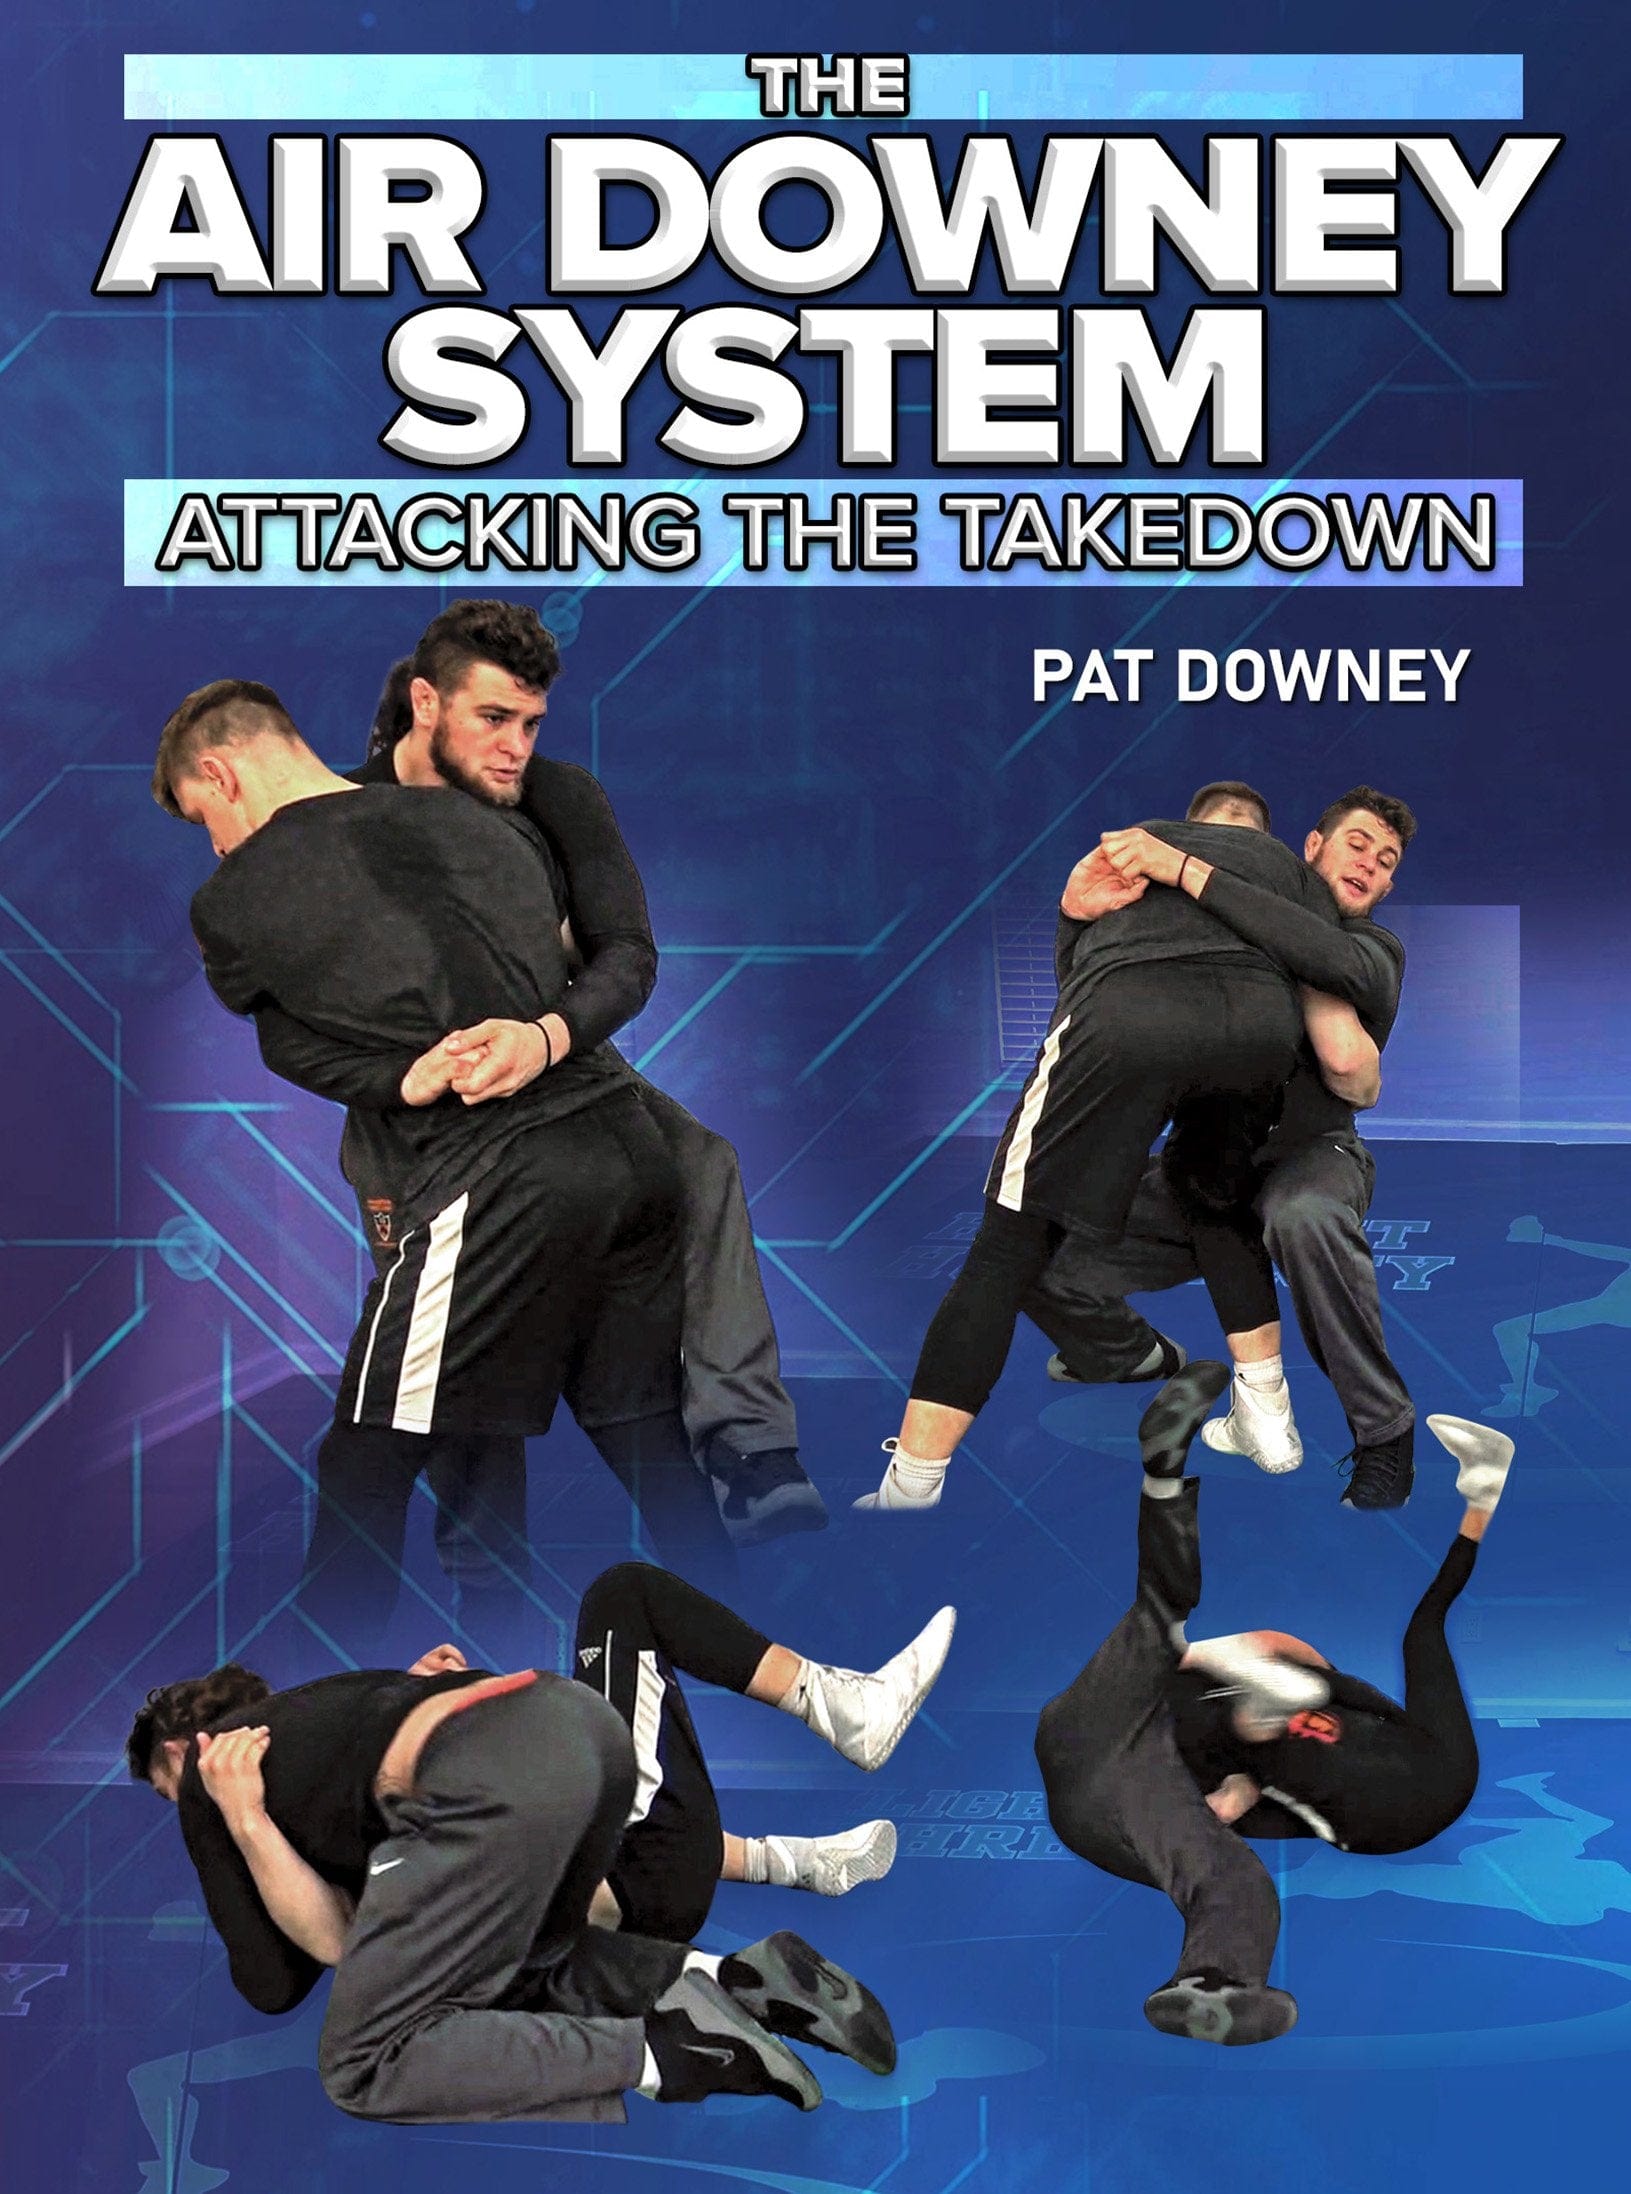 The Air Downey System by Pat Downey - Fanatic Wrestling